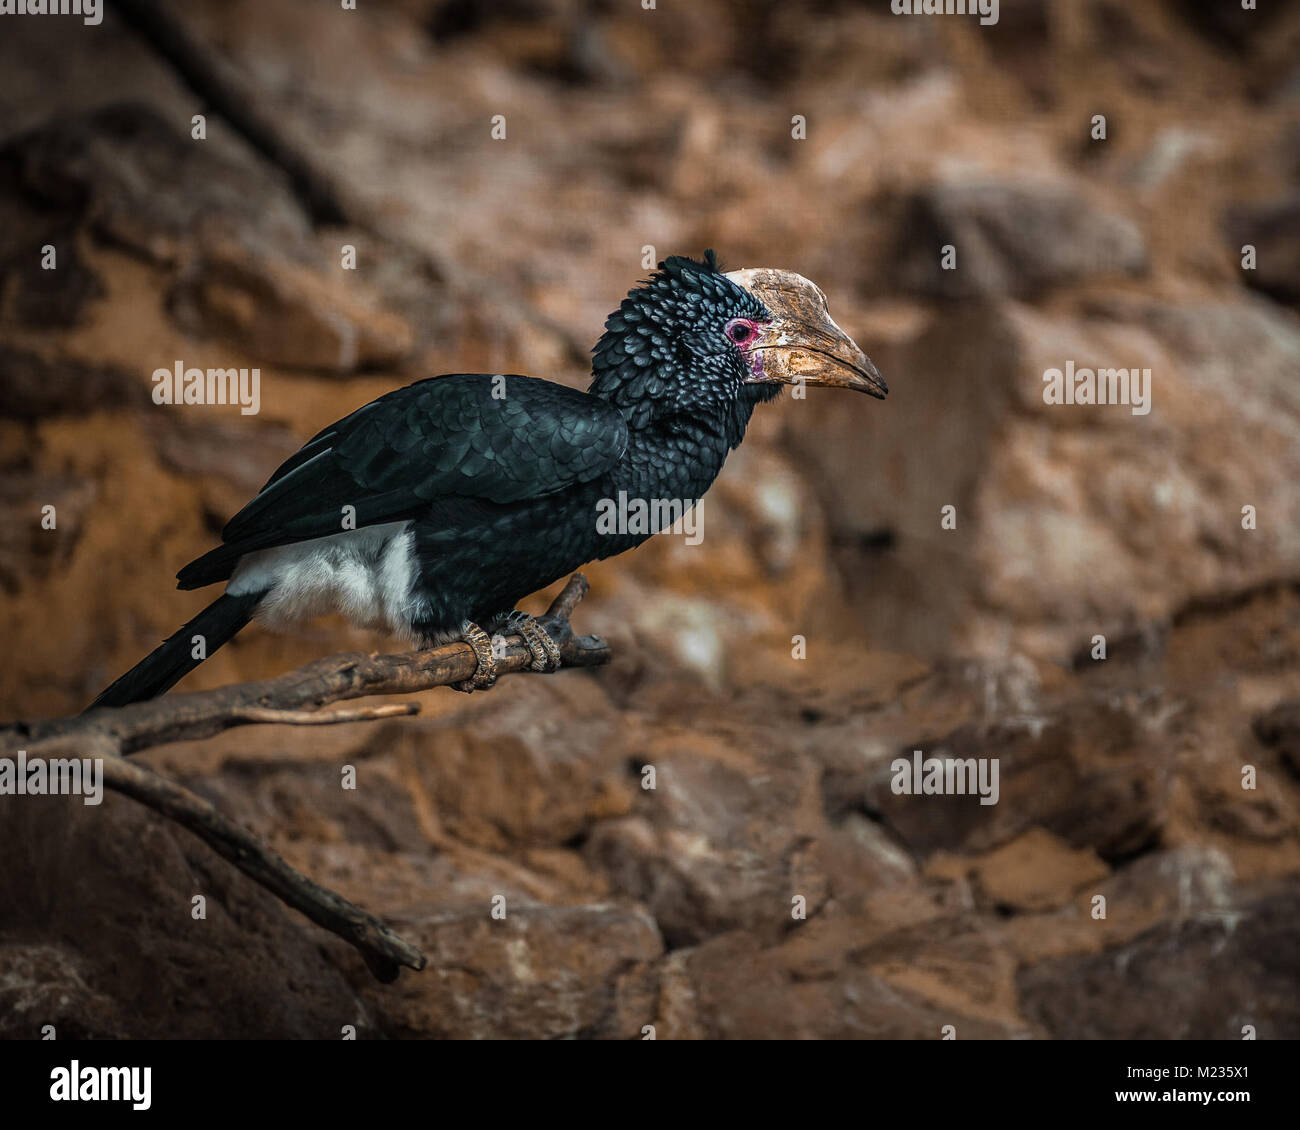 Silvery Cheeked Hornbill, Bycanistes brevis Stock Photo